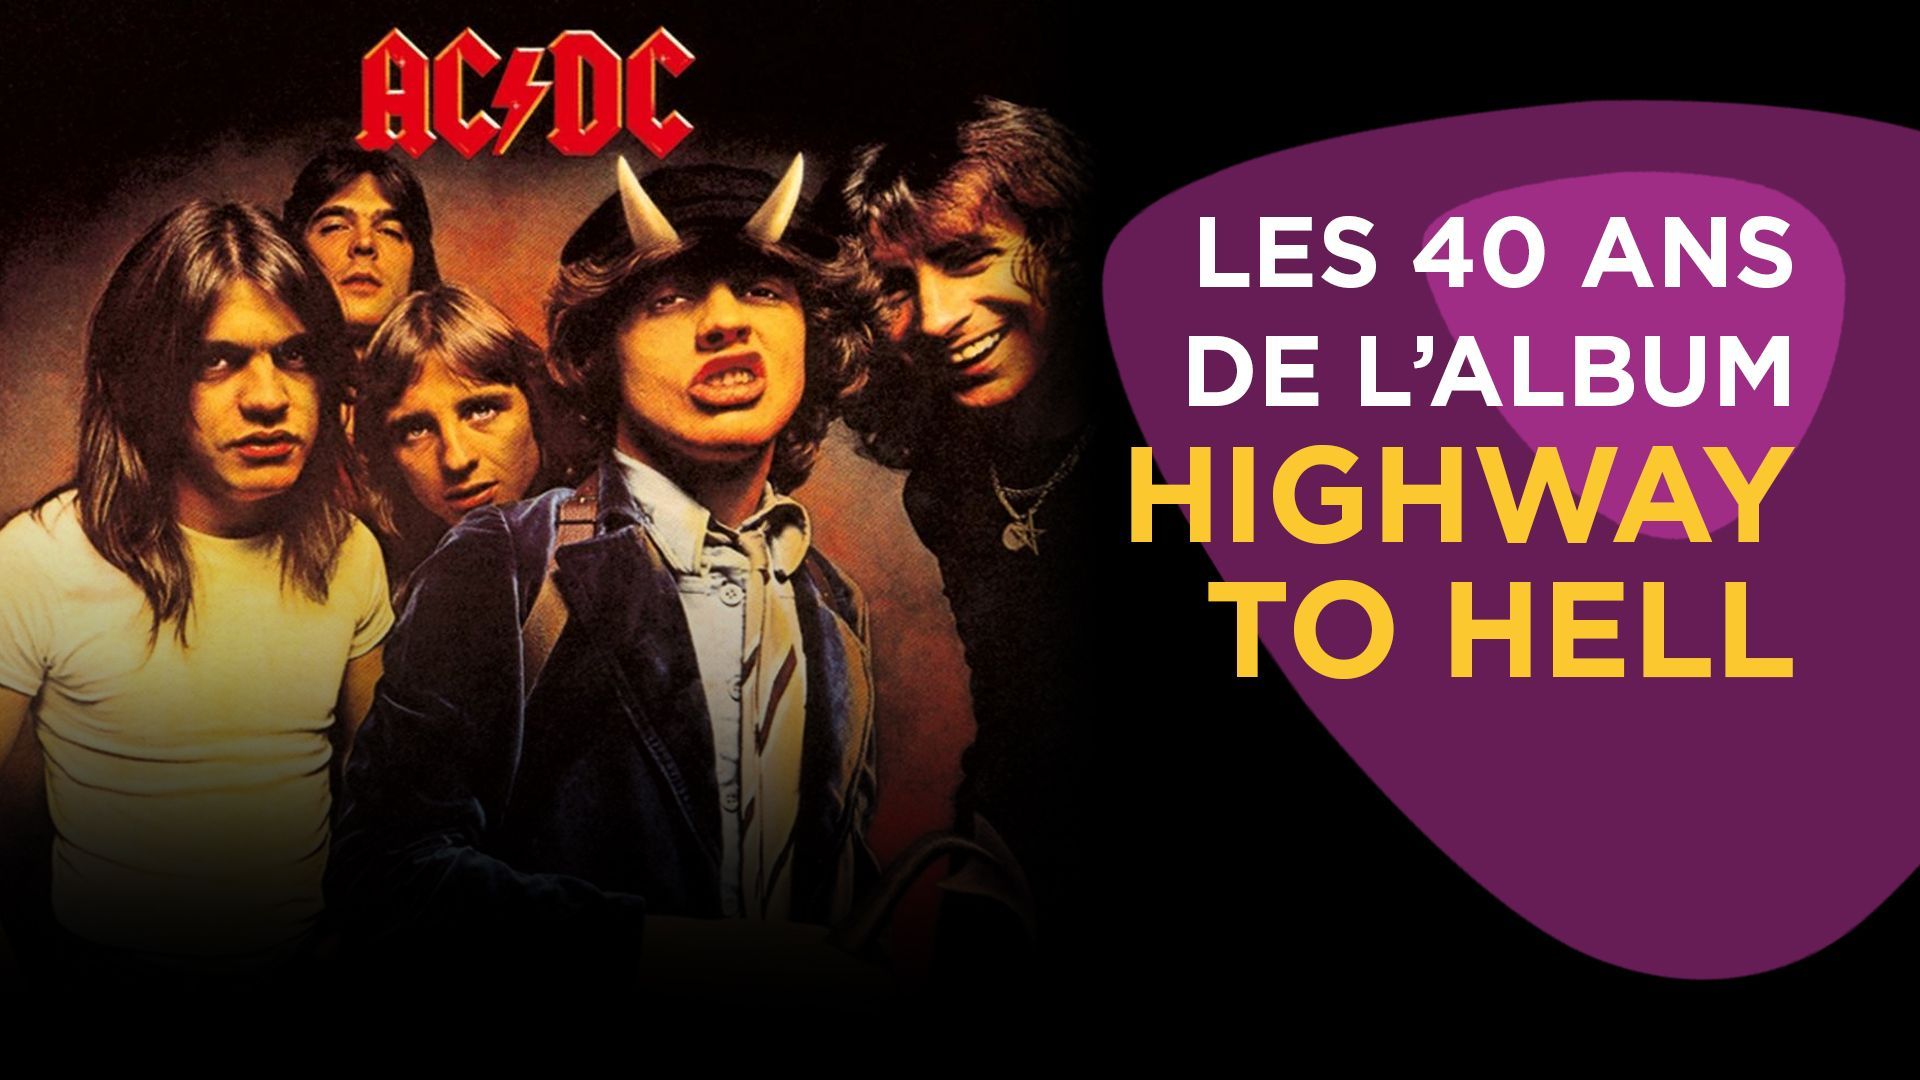 Concours AC/DC: "Highway To Hell" en vinyle